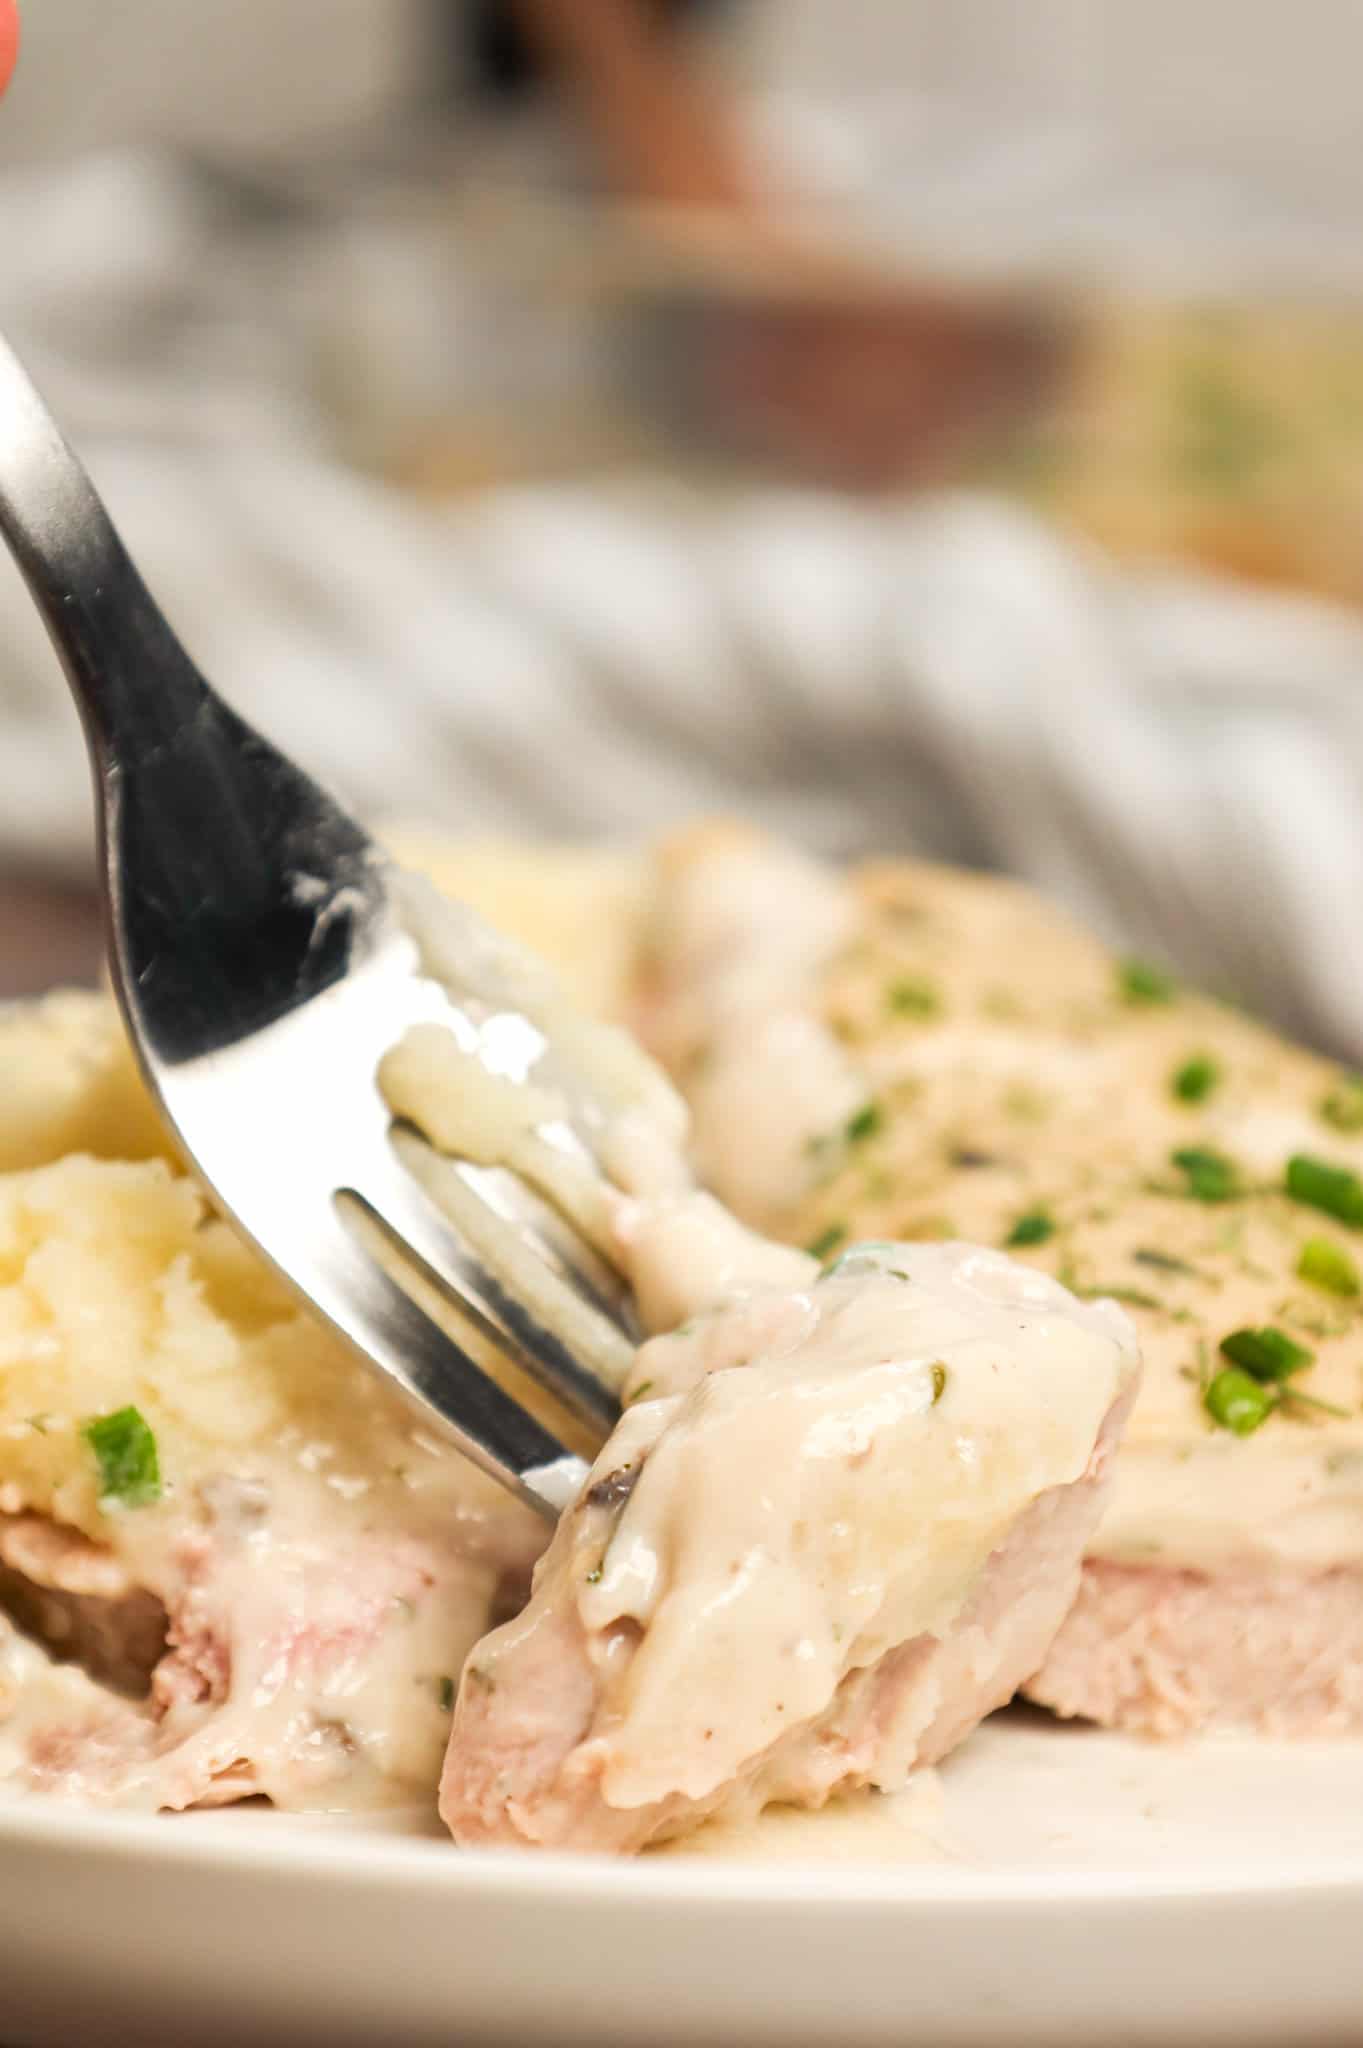 Ranch Pork Chops are an easy dinner recipe using boneless pork chops cooked in a creamy mixture of sour cream, cream of mushroom soup and ranch dressing mix.